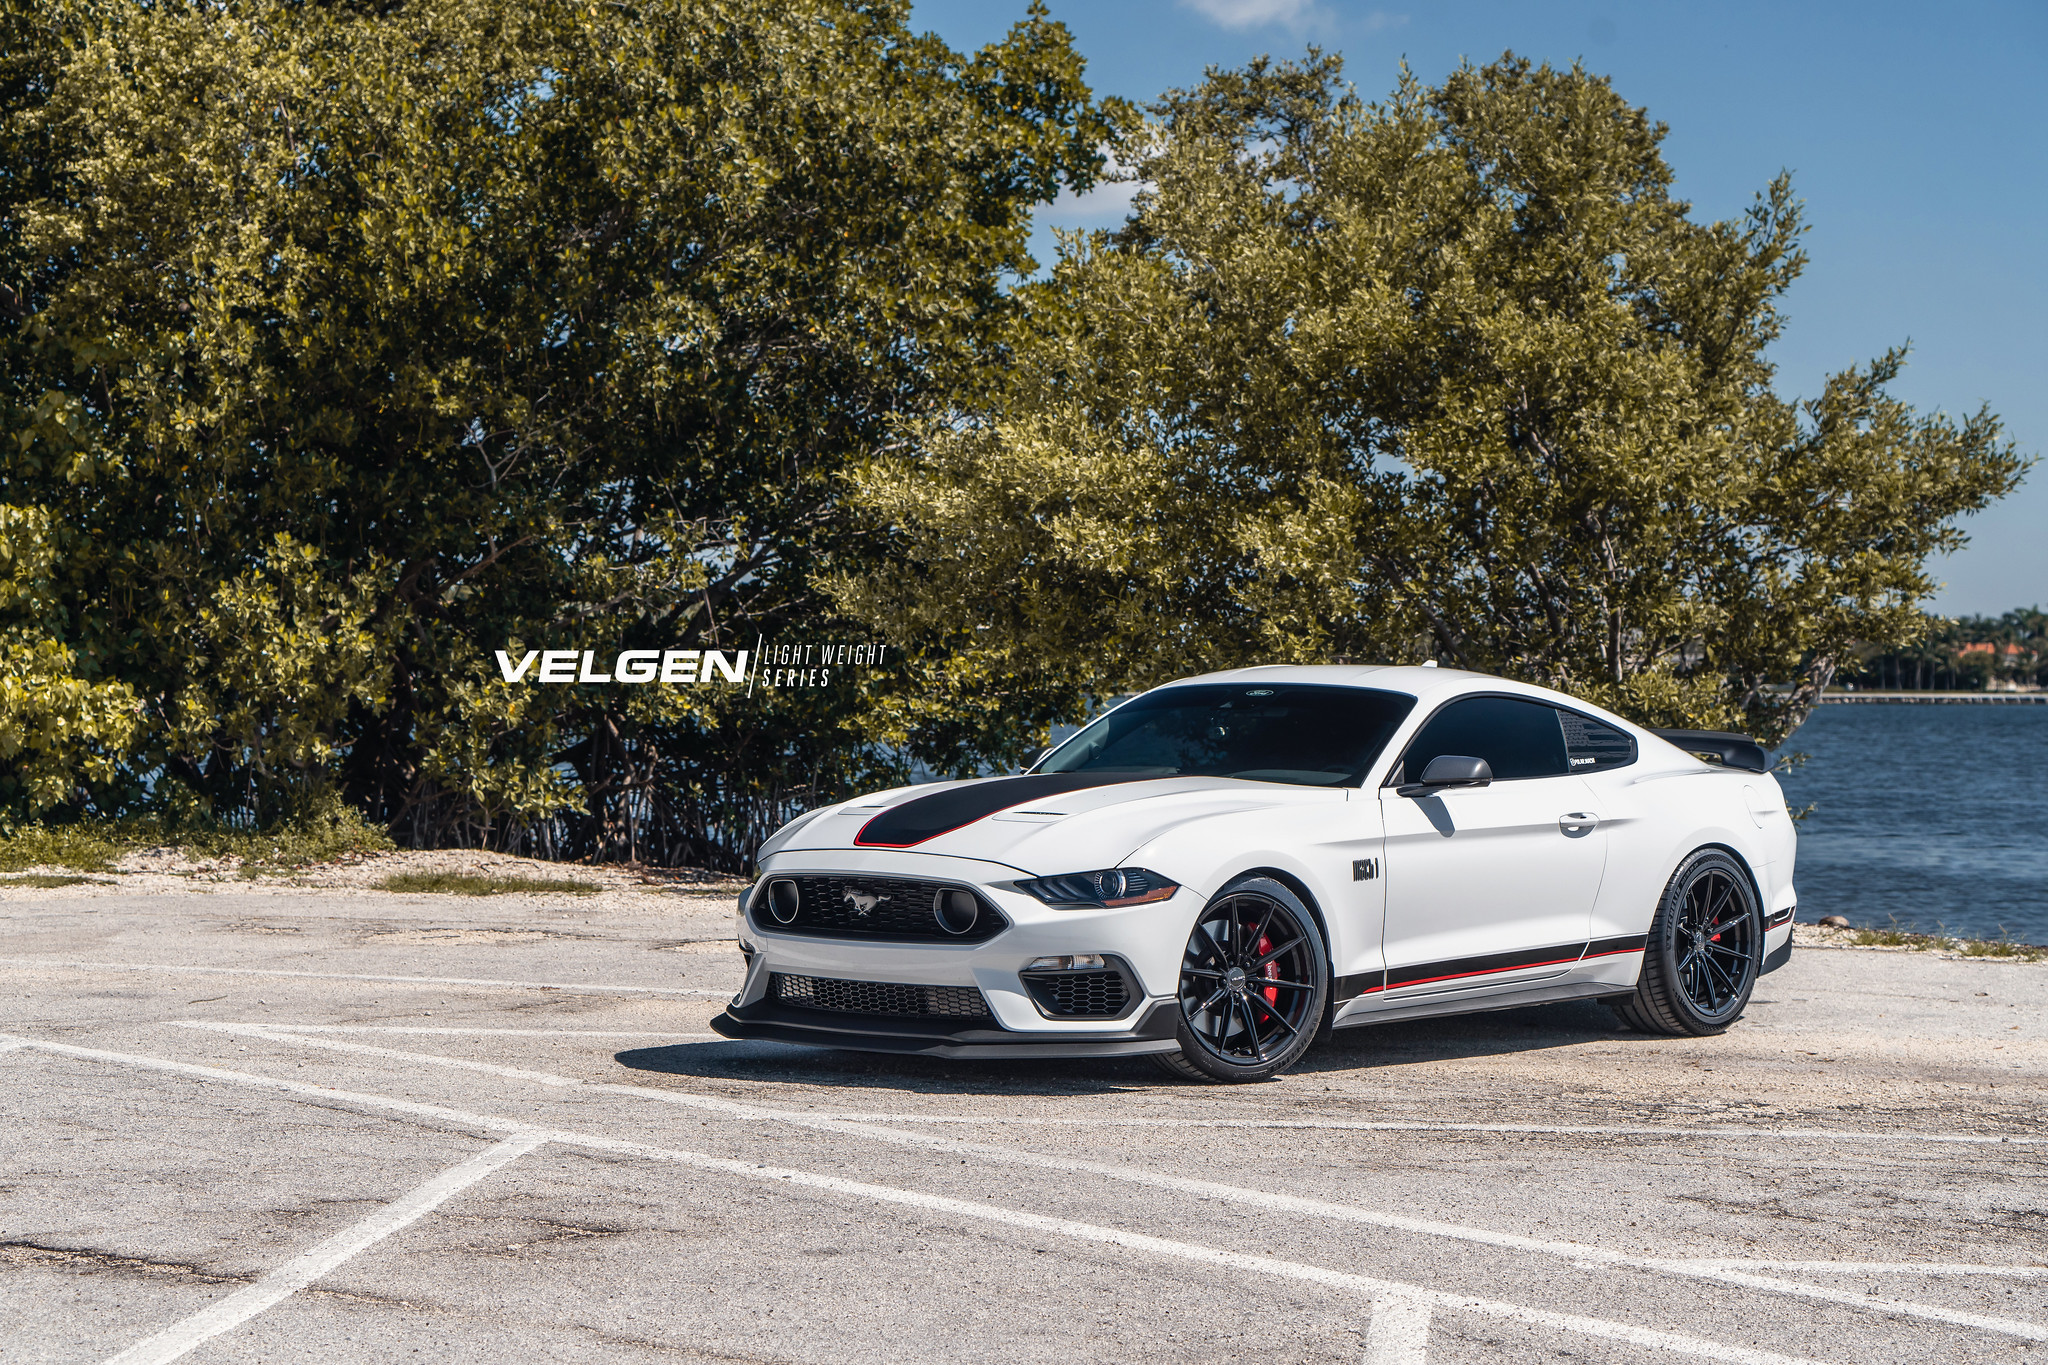 S650 Mustang 19" 20" Velgen Flow Forged Concave Wheels Mustang S650 - Vibe Motorsports Official Thread 52943228249_867e7686d8_k